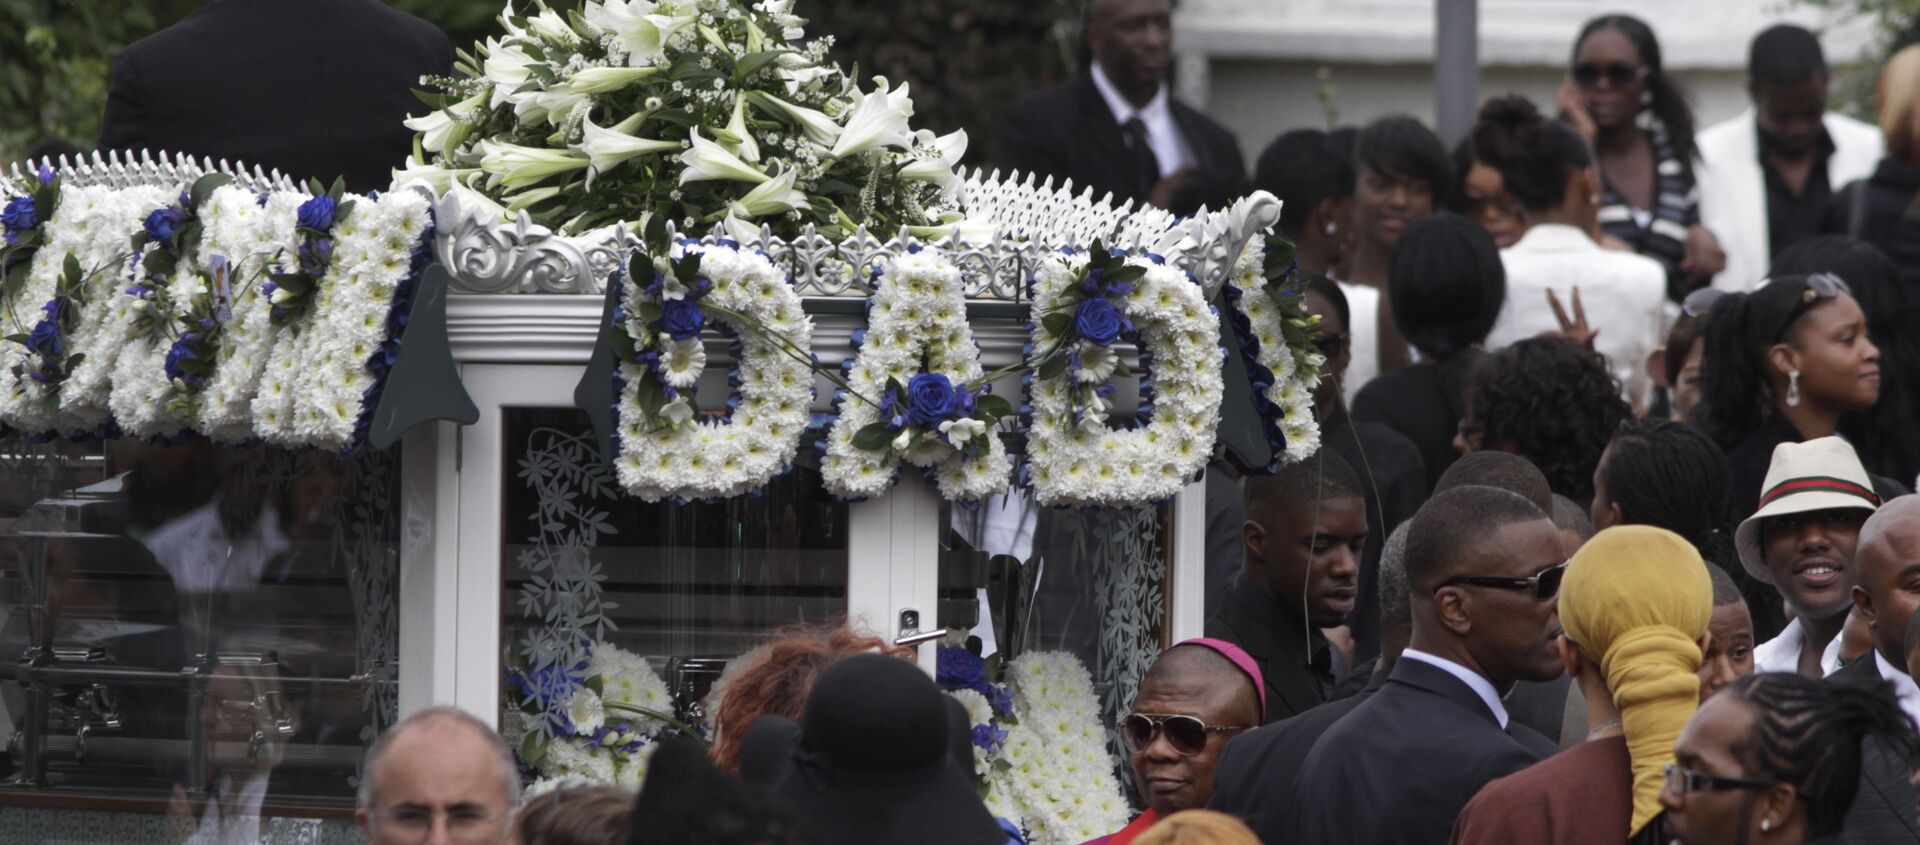 People gather around a hearse carrying Mark Duggan's coffin, as it prepares to leave the church for the cemetery during the funeral procession in north London,  Friday, Sept. 9, 2011. - Sputnik International, 1920, 10.08.2021